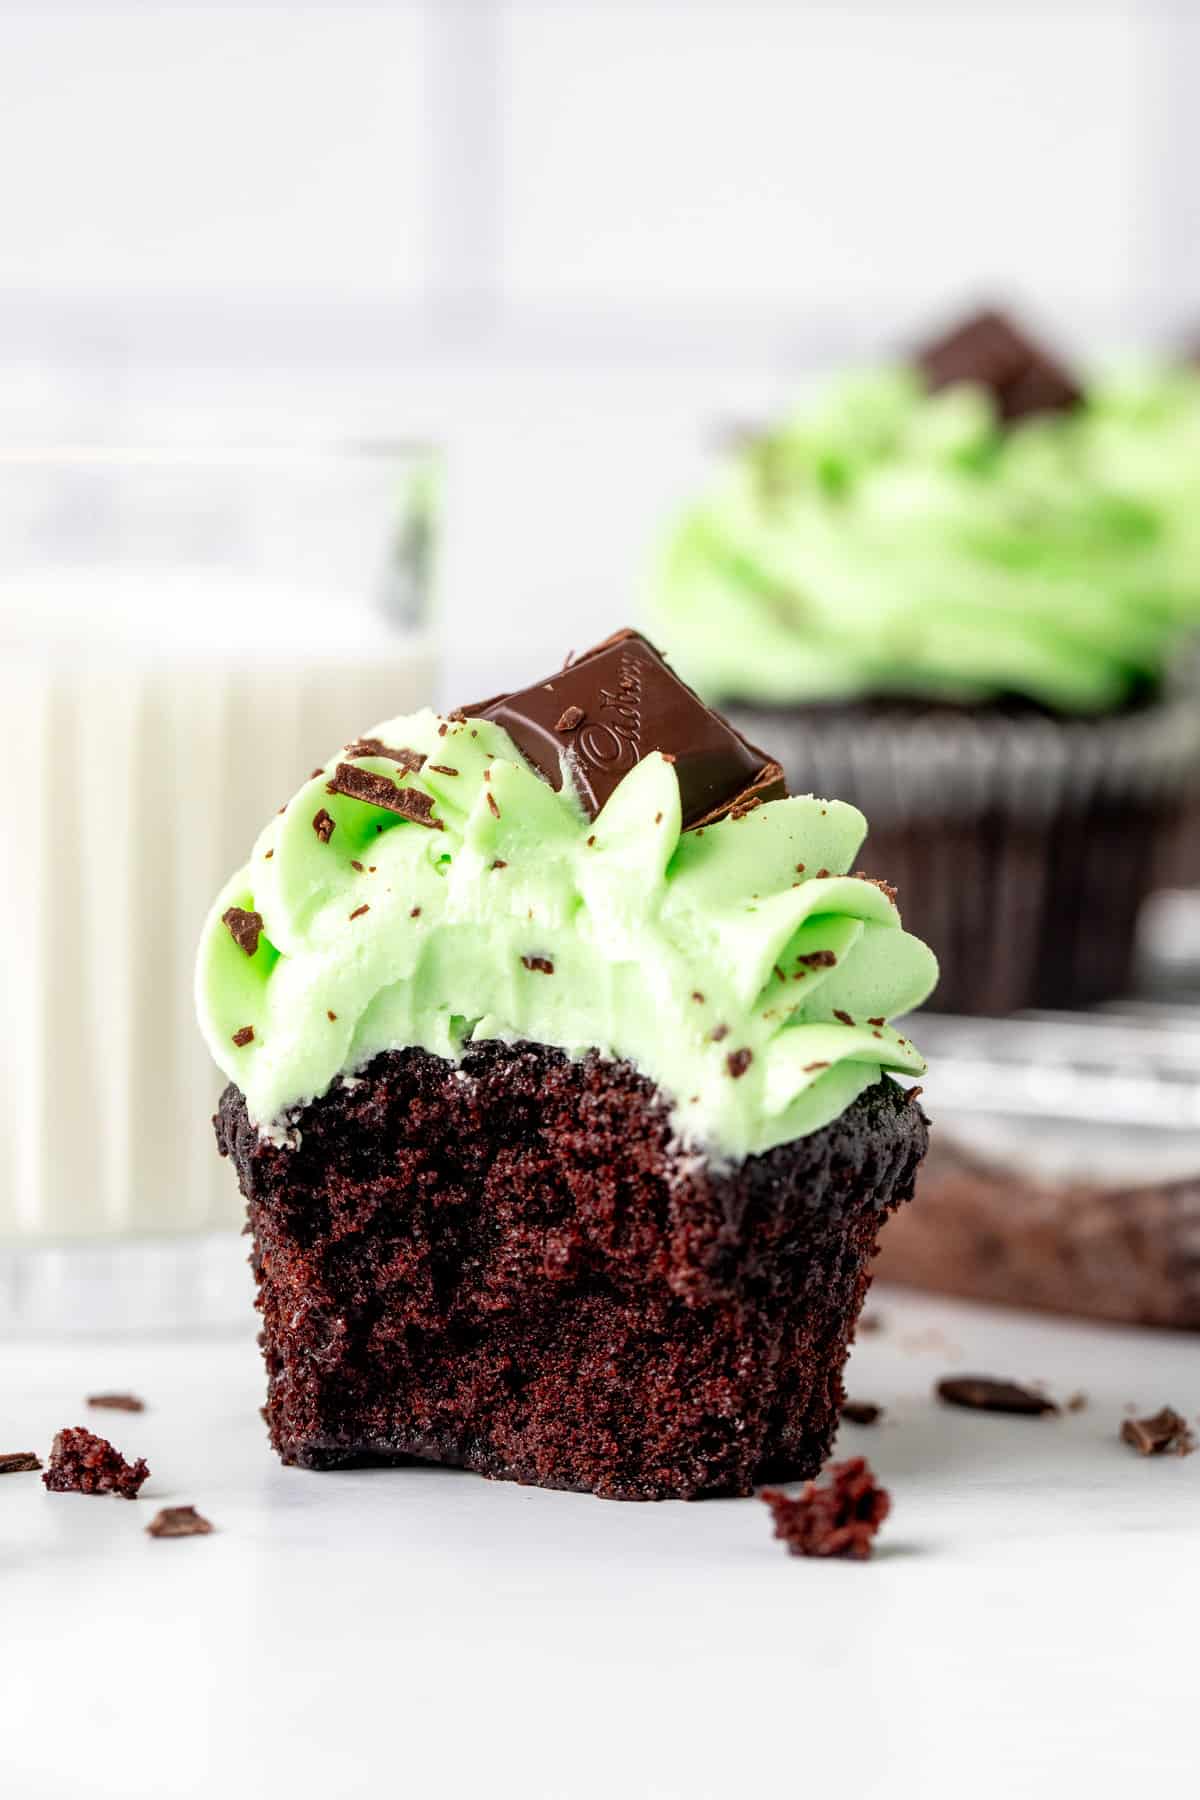 Mint chocolate cupcake with a bite taken out